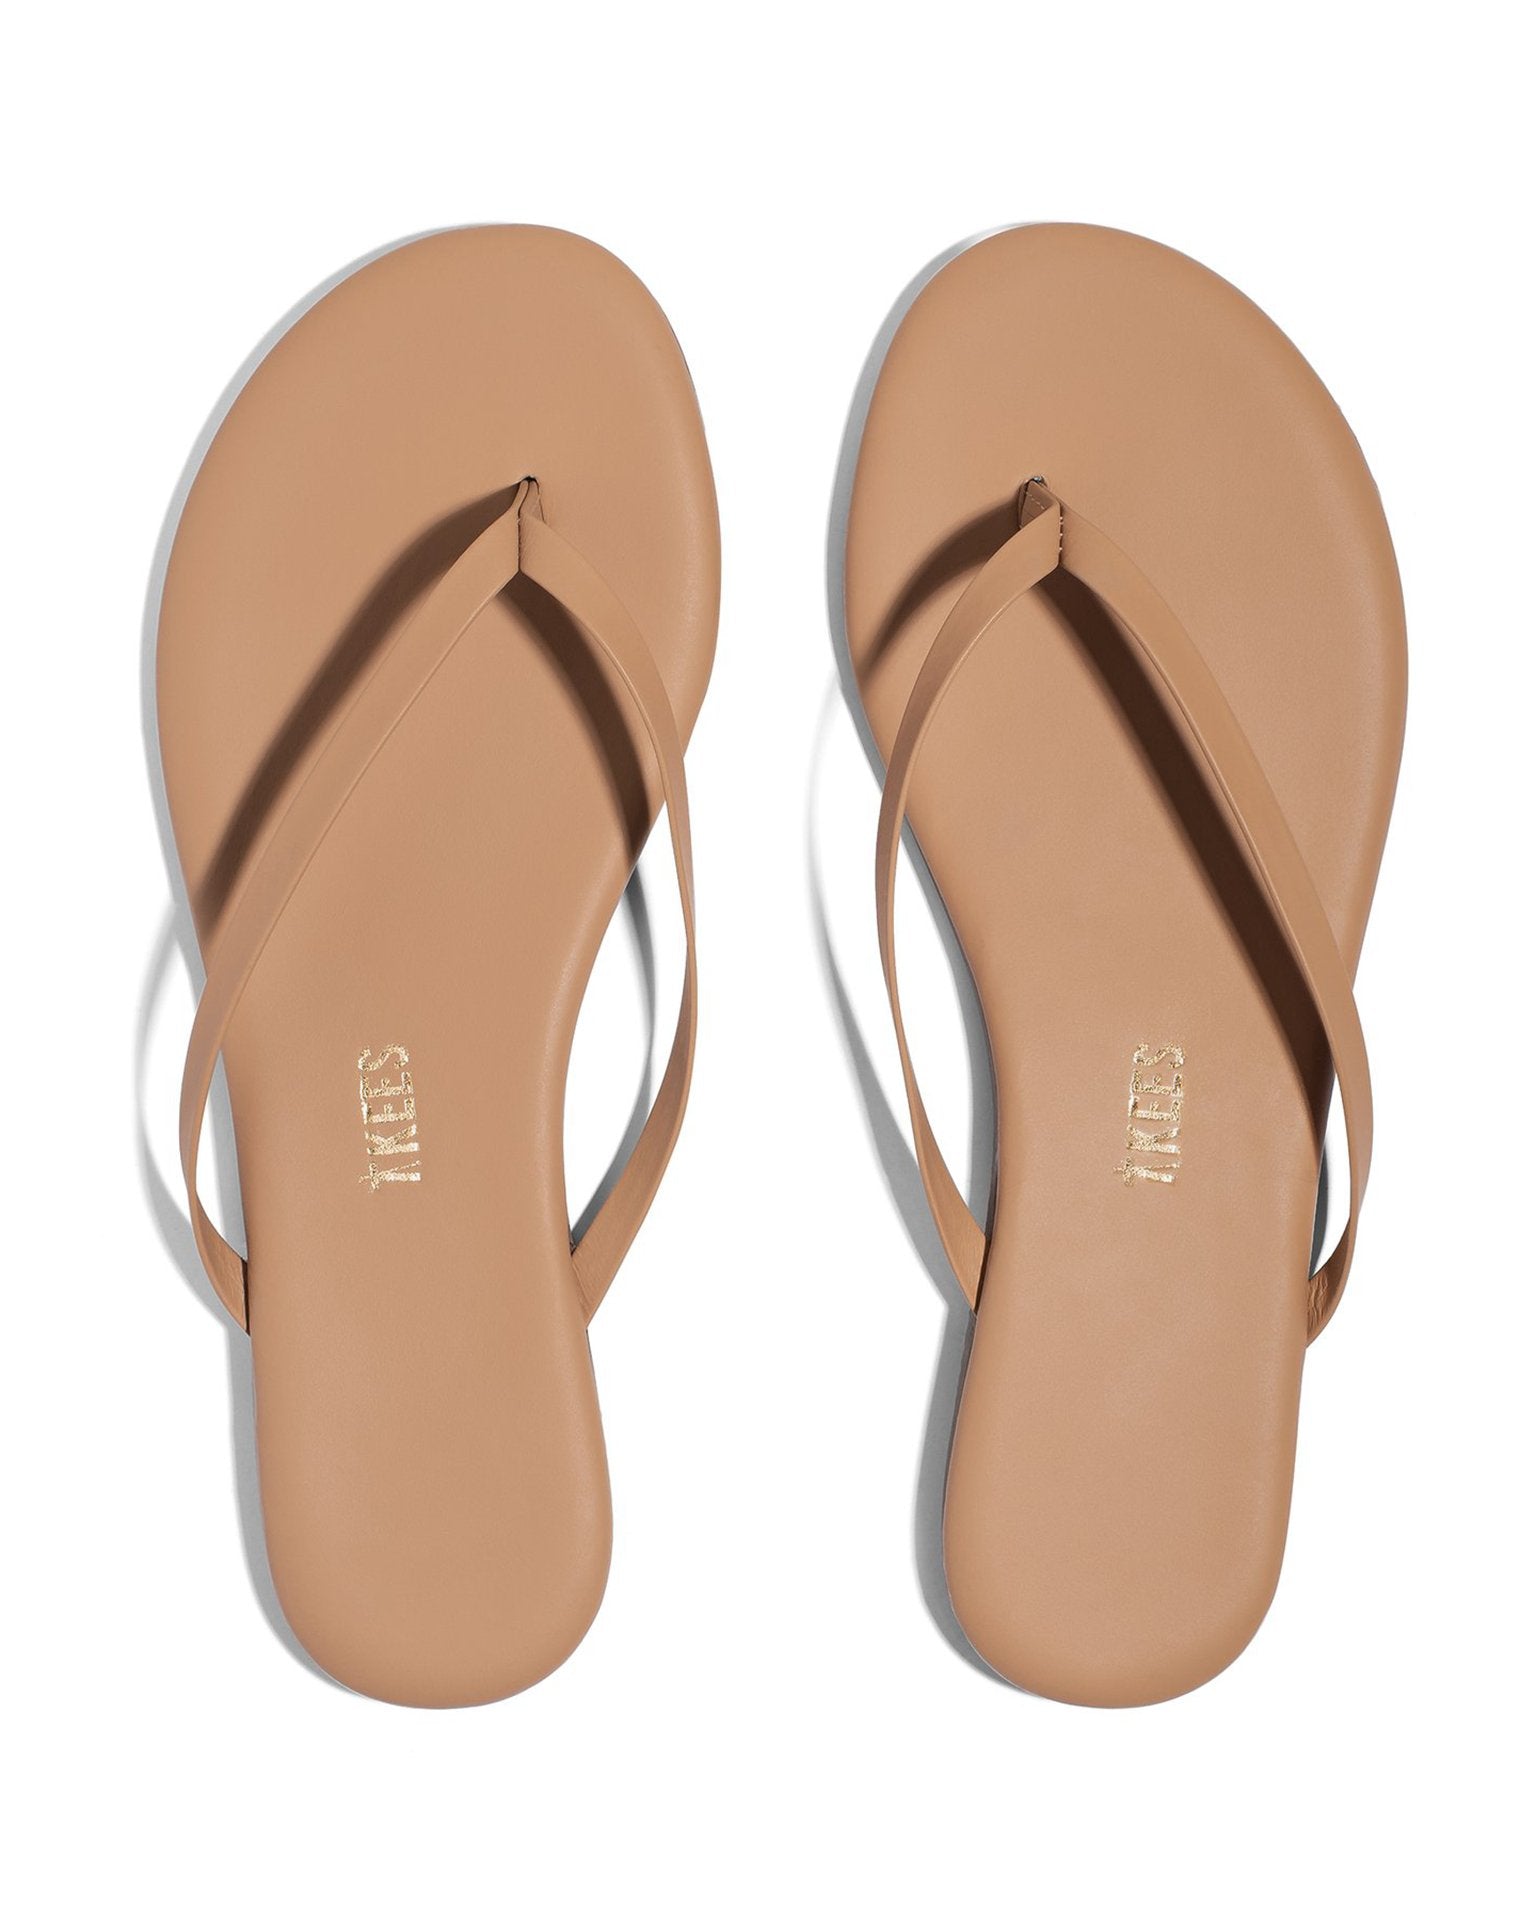 Tkees Nudes Flip Flop in Sunbliss - Bliss Boutiques